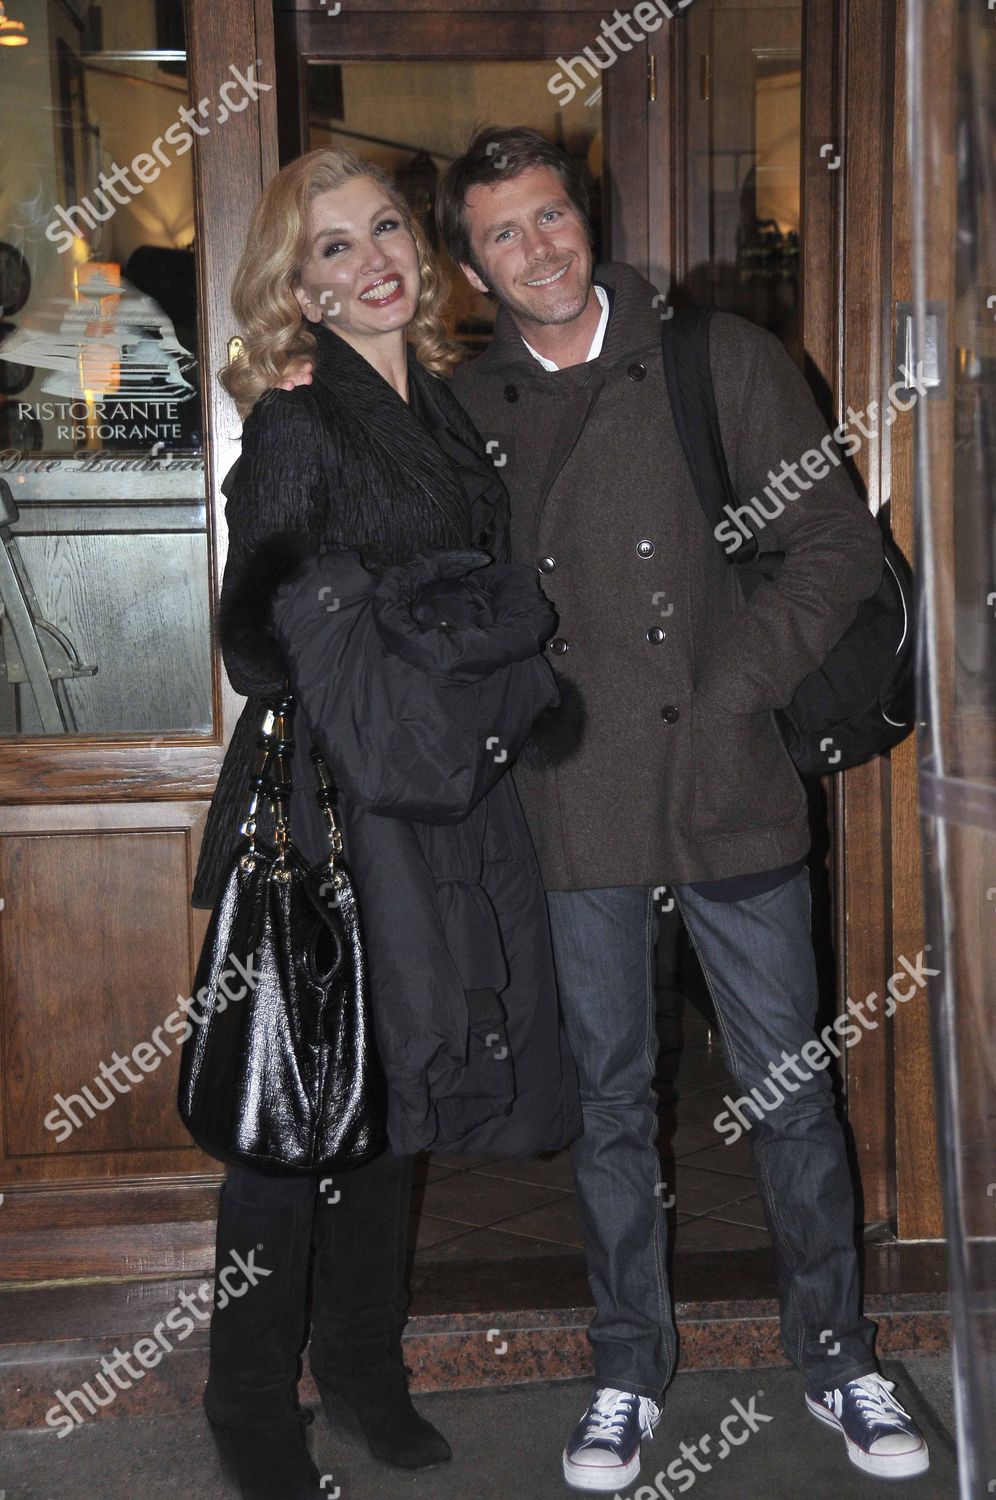 prince-emanuele-filiberto-di-savoia-out-for-dinner-with-tv-presenter-milly-carlucci-rome-italy-shutterstock-editorial-1161808i.jpg